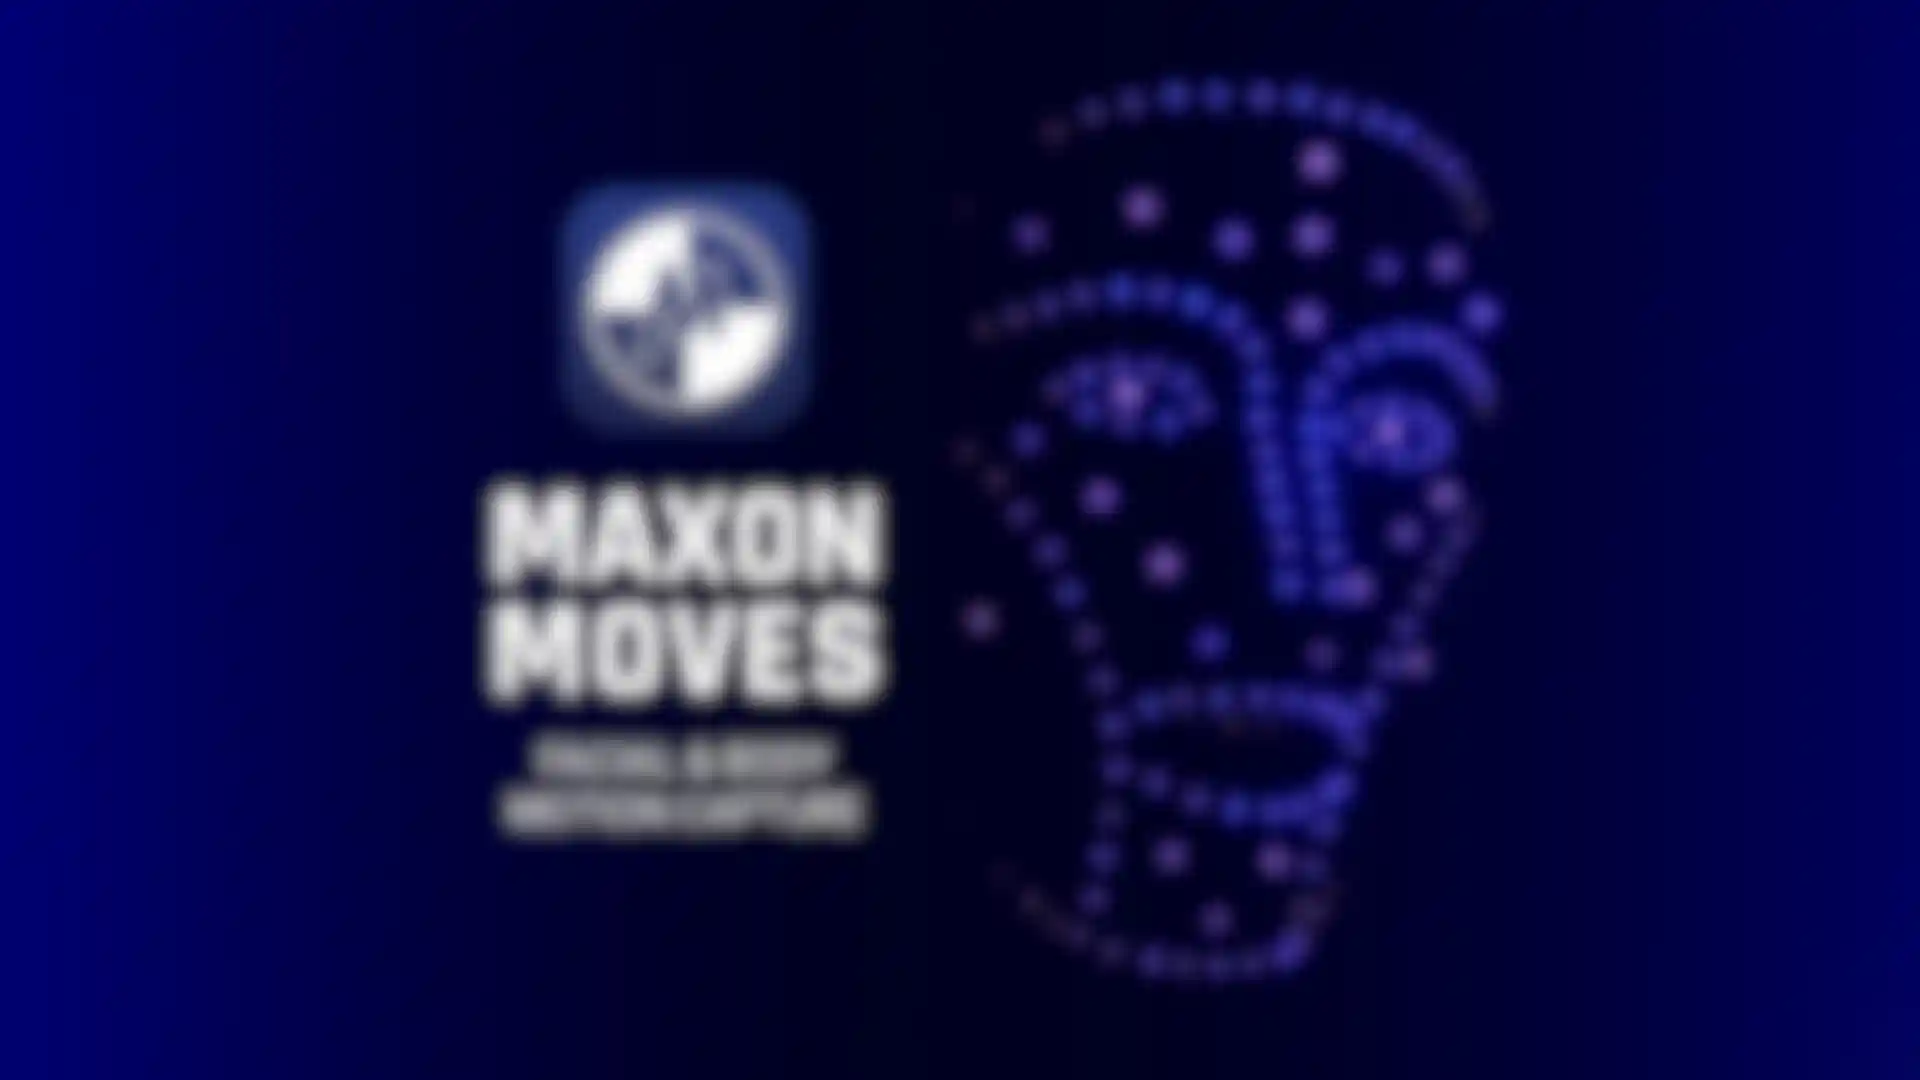 Moves by Maxon Update Offers Streamlined Workflow image